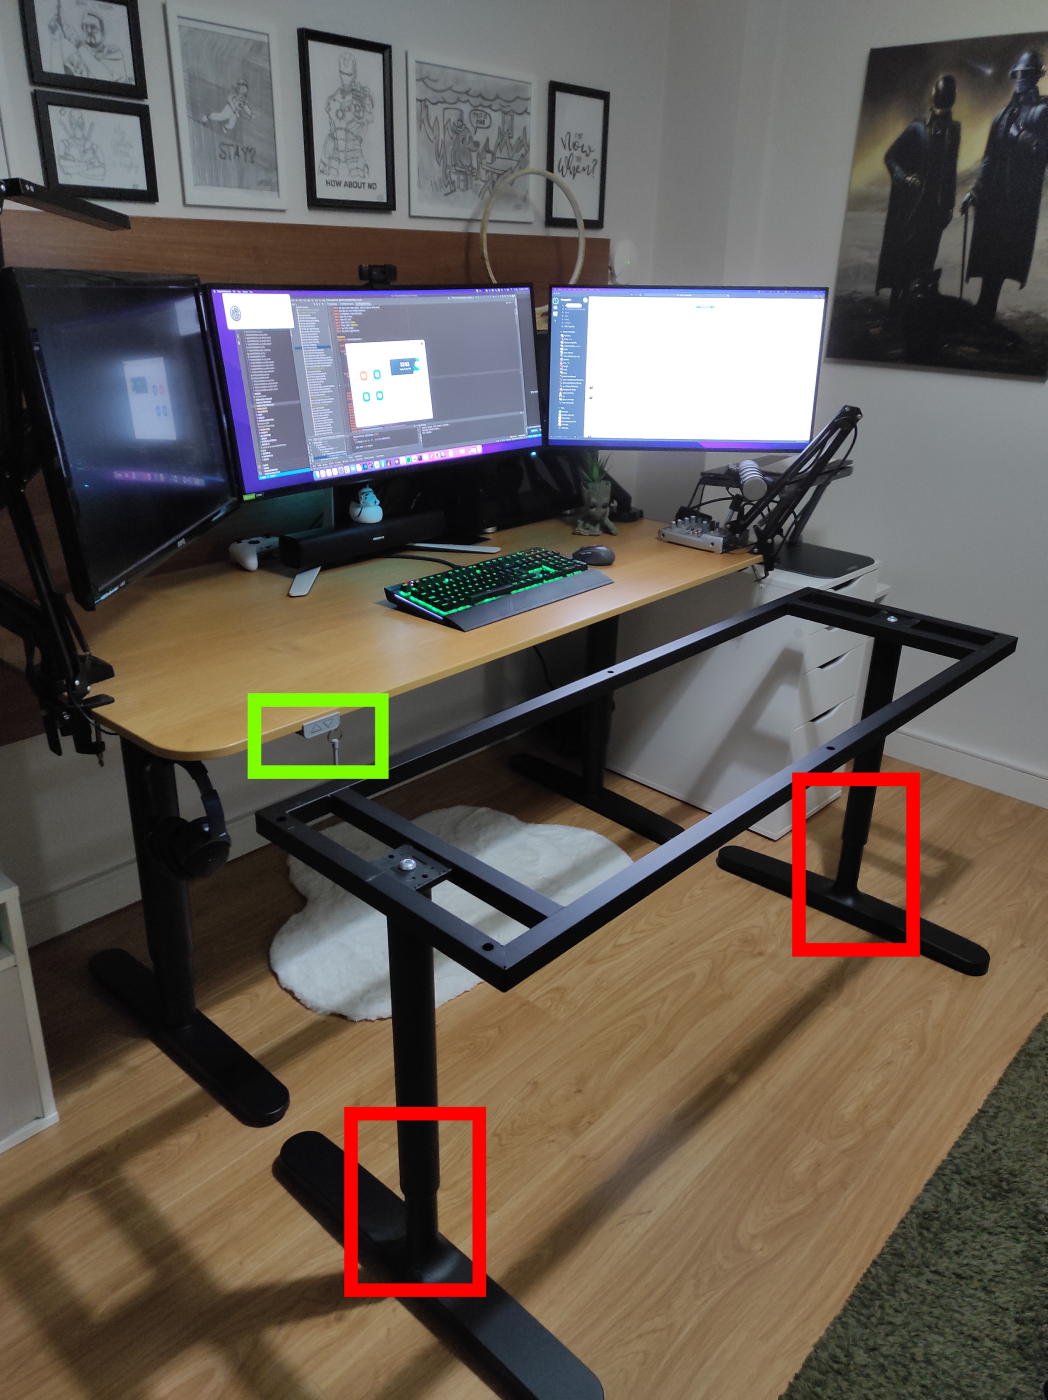 I've used IKEA's BEKANT desk for years, adjustable in height with an Allen key (see red squares). I recently upgraded the underframe to its motorized version, which makes it an excellent standing desk (see green square).